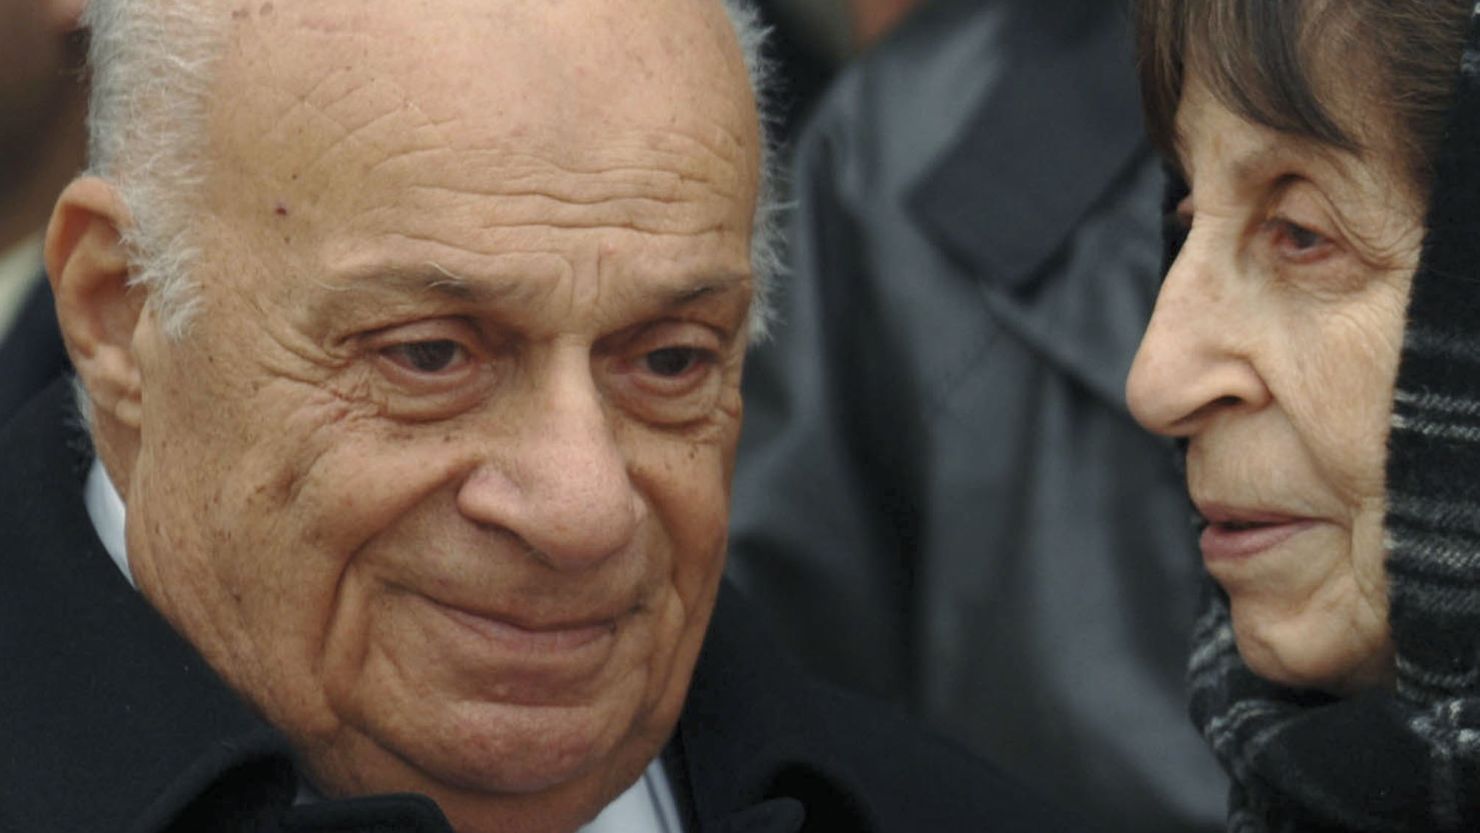 Rauf Denktas with Rahsan Ecevit, the widow of Bulent Ecevit, at the former Turkish prime minister's funeral in 2006.